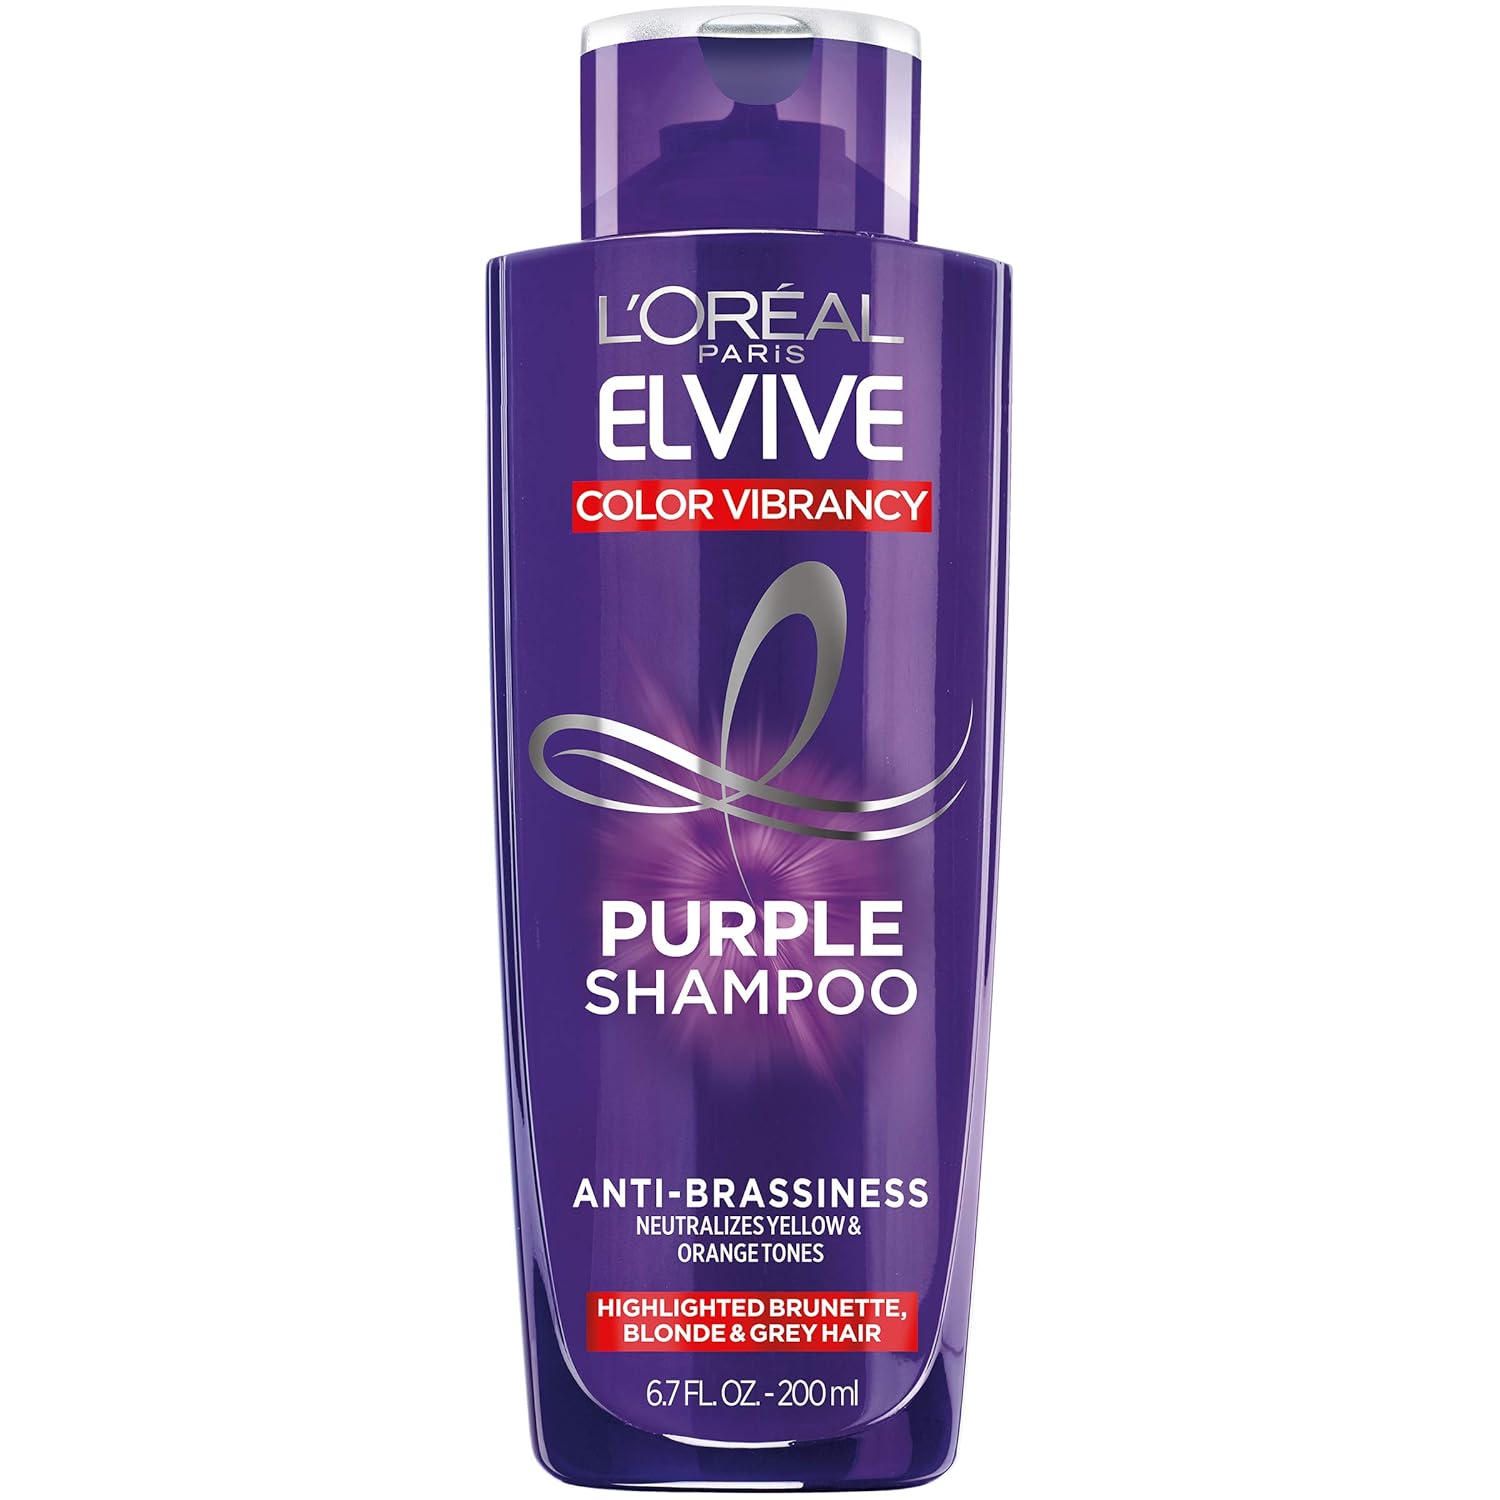 L'Oreal Paris Elvive Color Vibrancy Anti-Brassiness Purple Shampoo for Color-Treated Hair